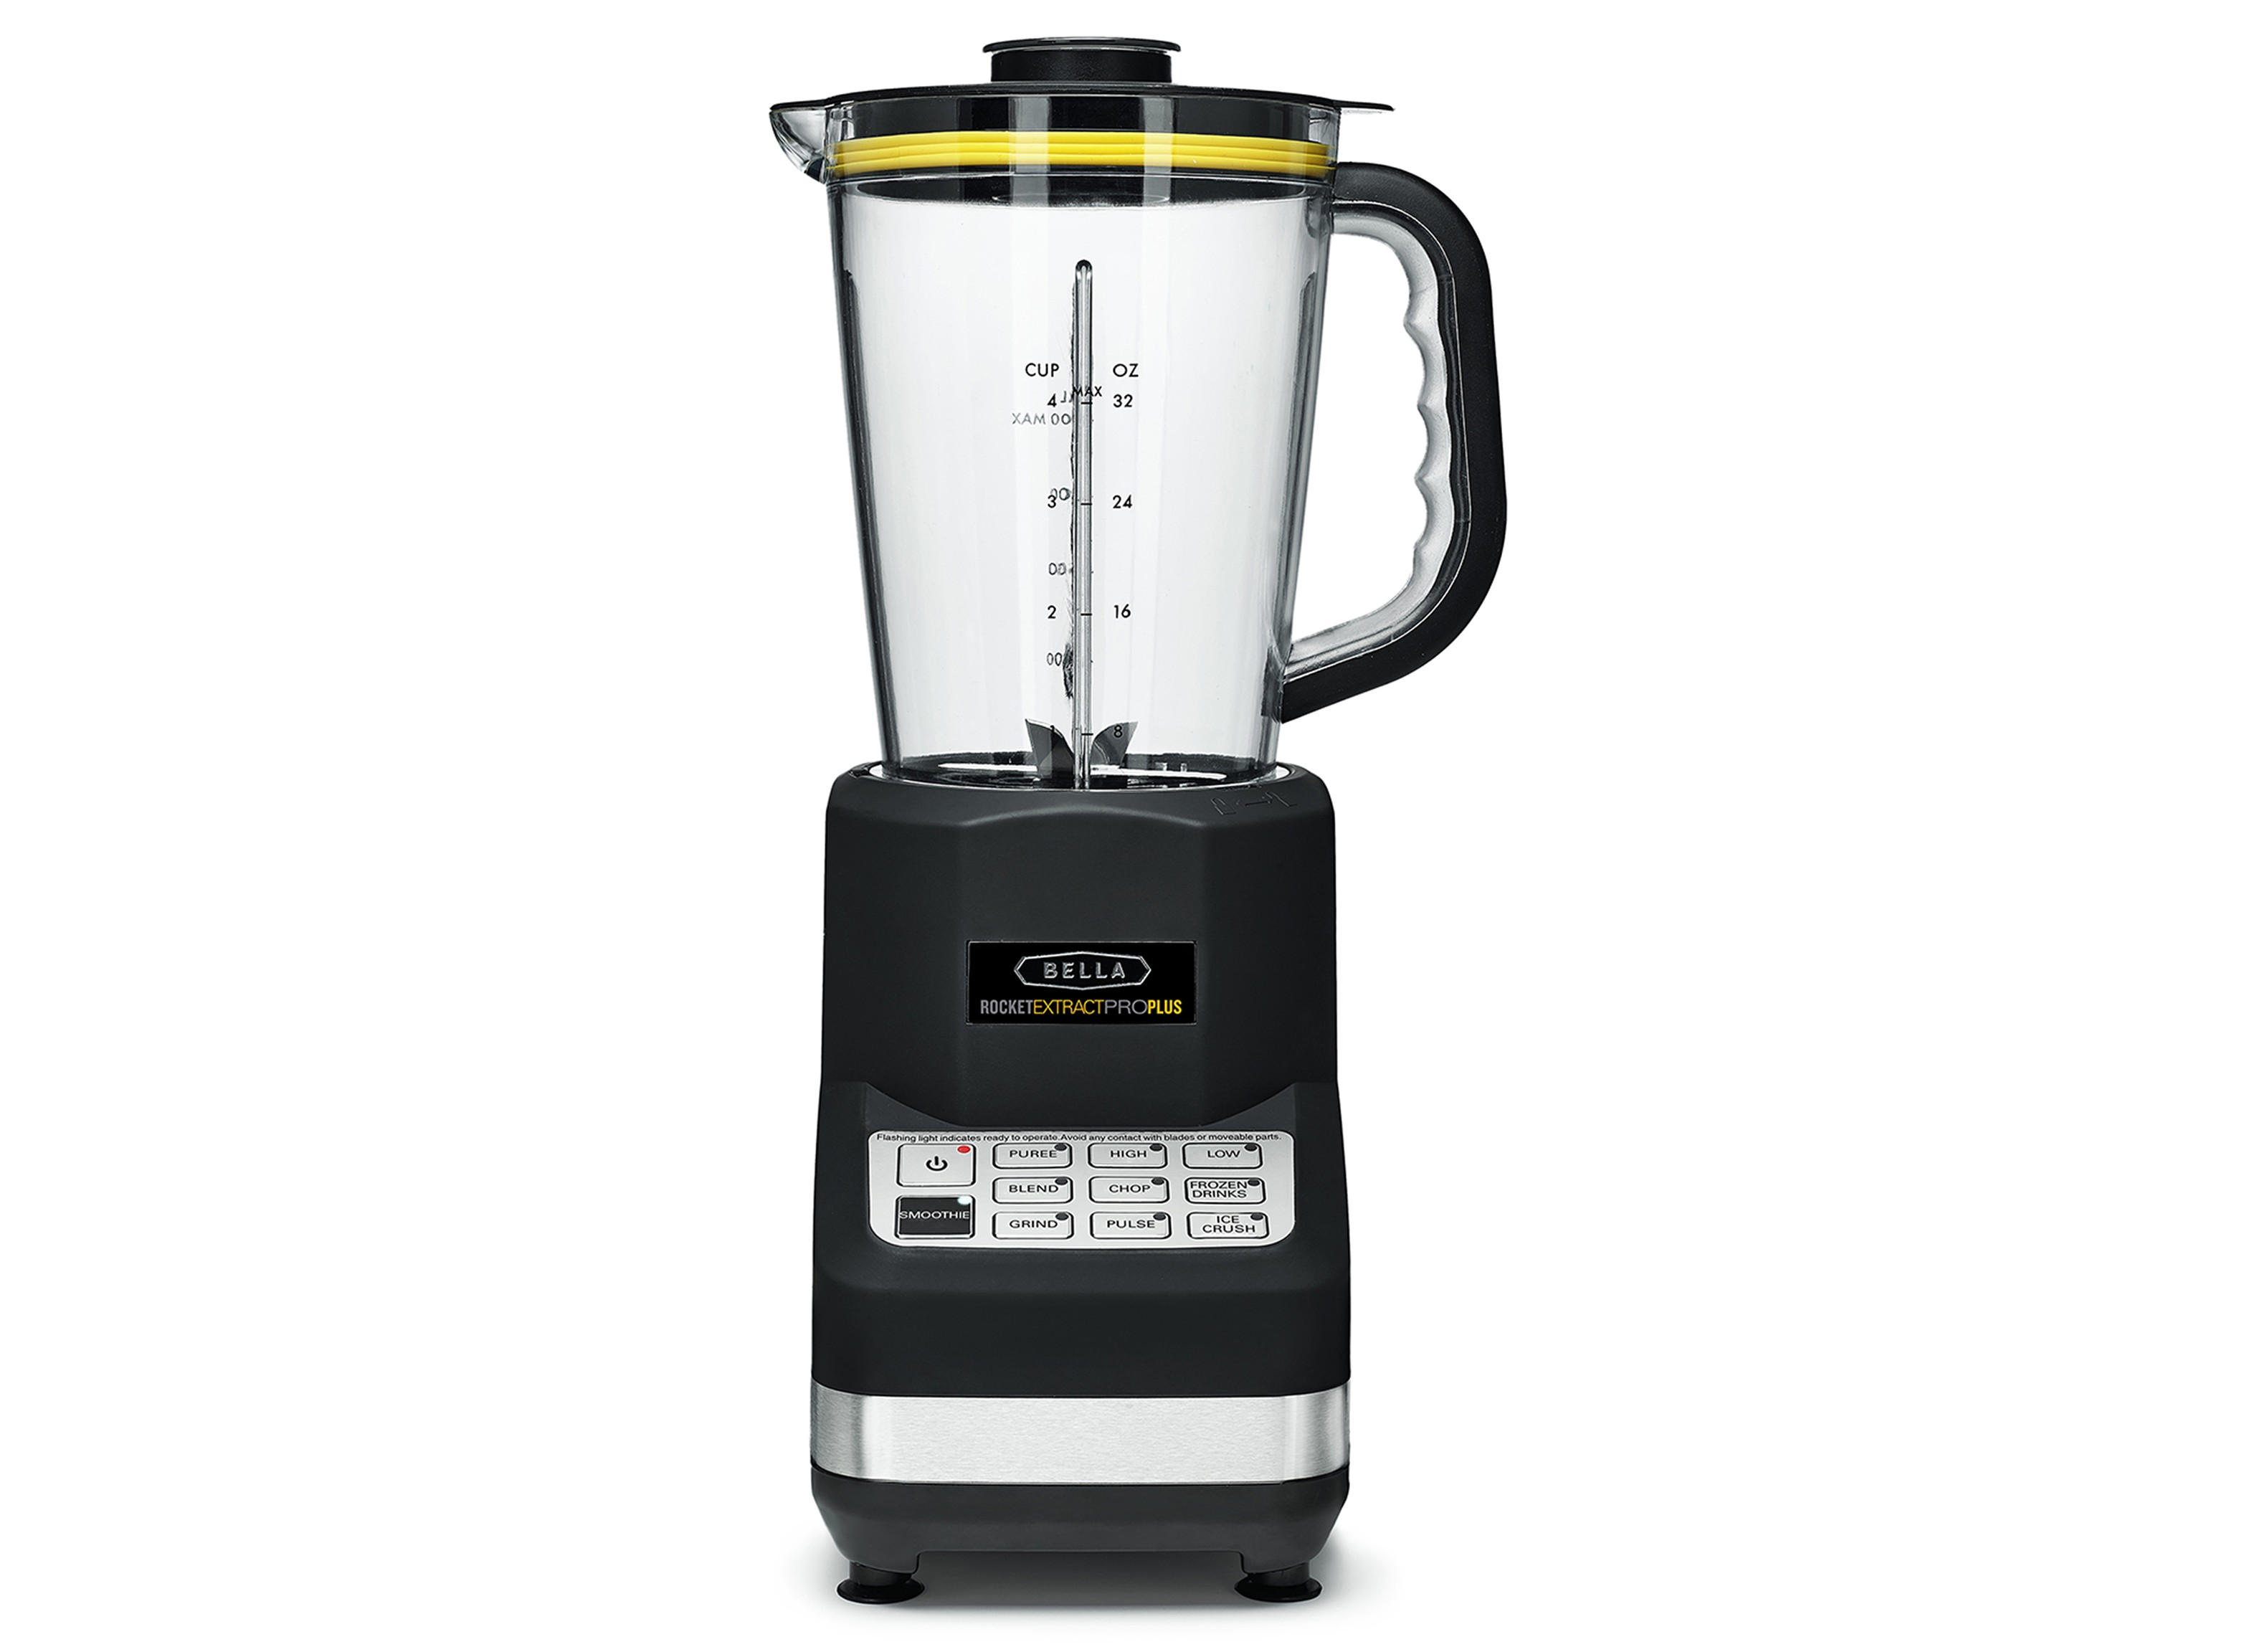 https://crdms.images.consumerreports.org/prod/products/cr/models/392729-blenders-bella-rocketextractproplusbla14285personal.jpg